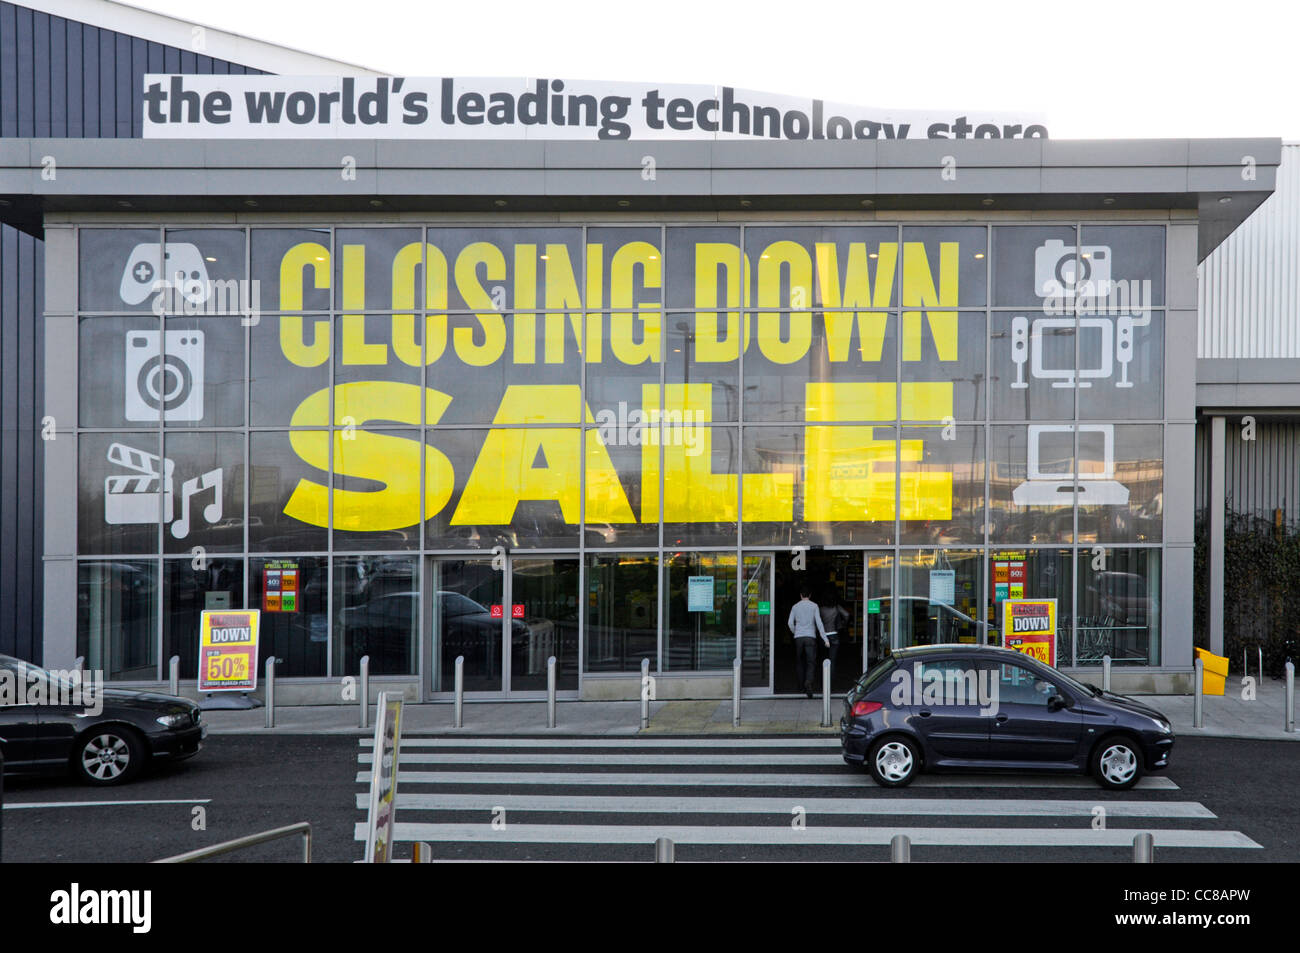 Best Buy electrical technology store big closing down sale sign above shop front entrance Lakeside Retail Park West Thurrock Essex England UK Stock Photo